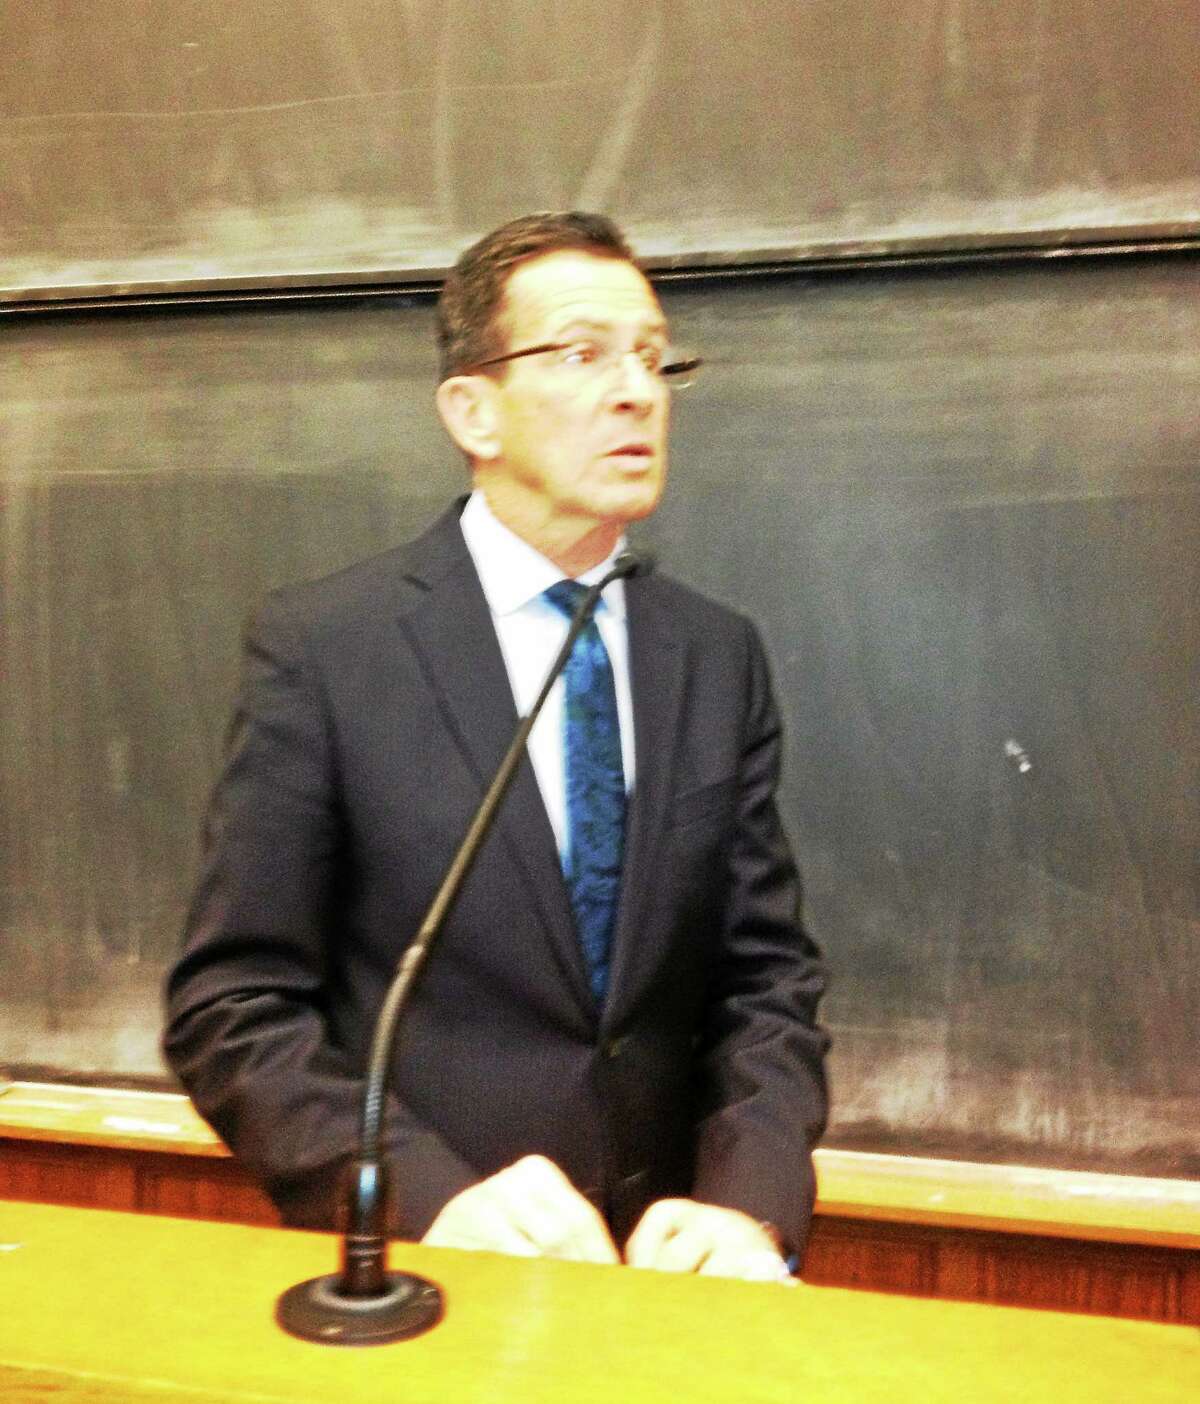 Gov. Dannel P. Malloy talks about crime reduction initiatives in a speech at Yale Law School Tuesday in New Haven.